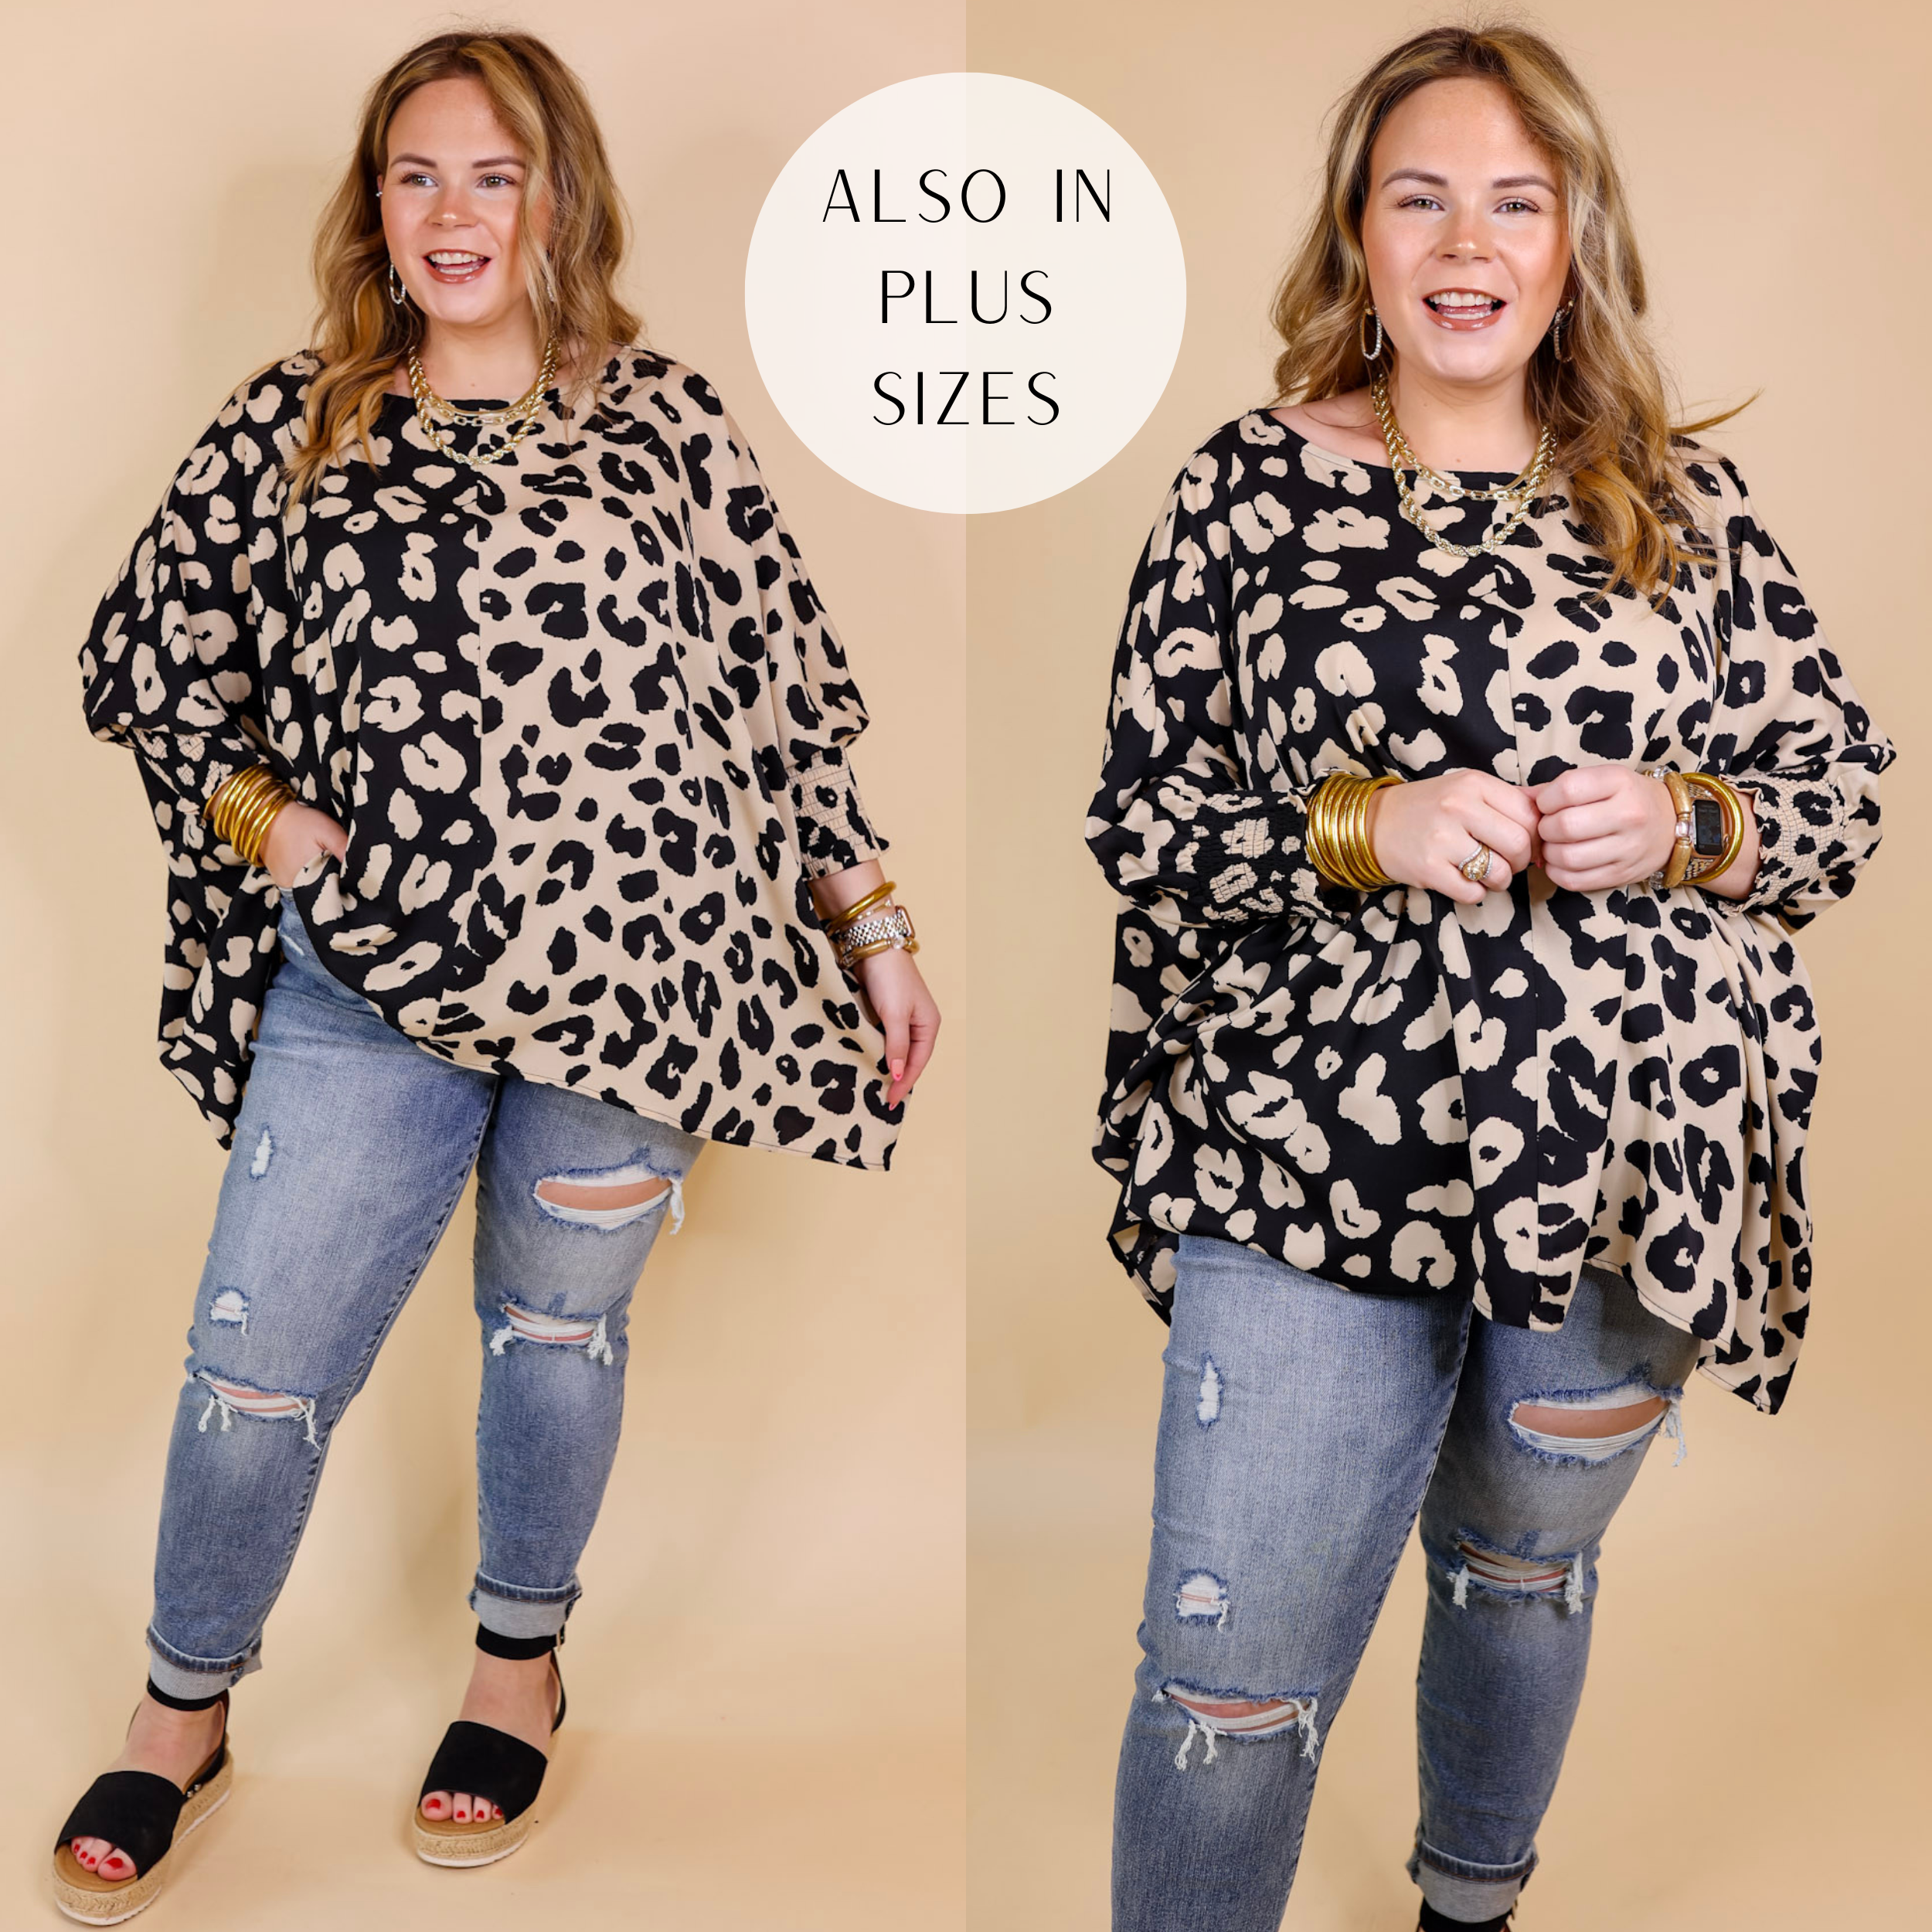 Model is wearing a half black and half beige poncho top with leopard print spots. This long sleeve top is smocked at the wrist and has a scoop neckline. Model has this top paired with distressed skinny jeans, black platform sandals, and gold jewelry.